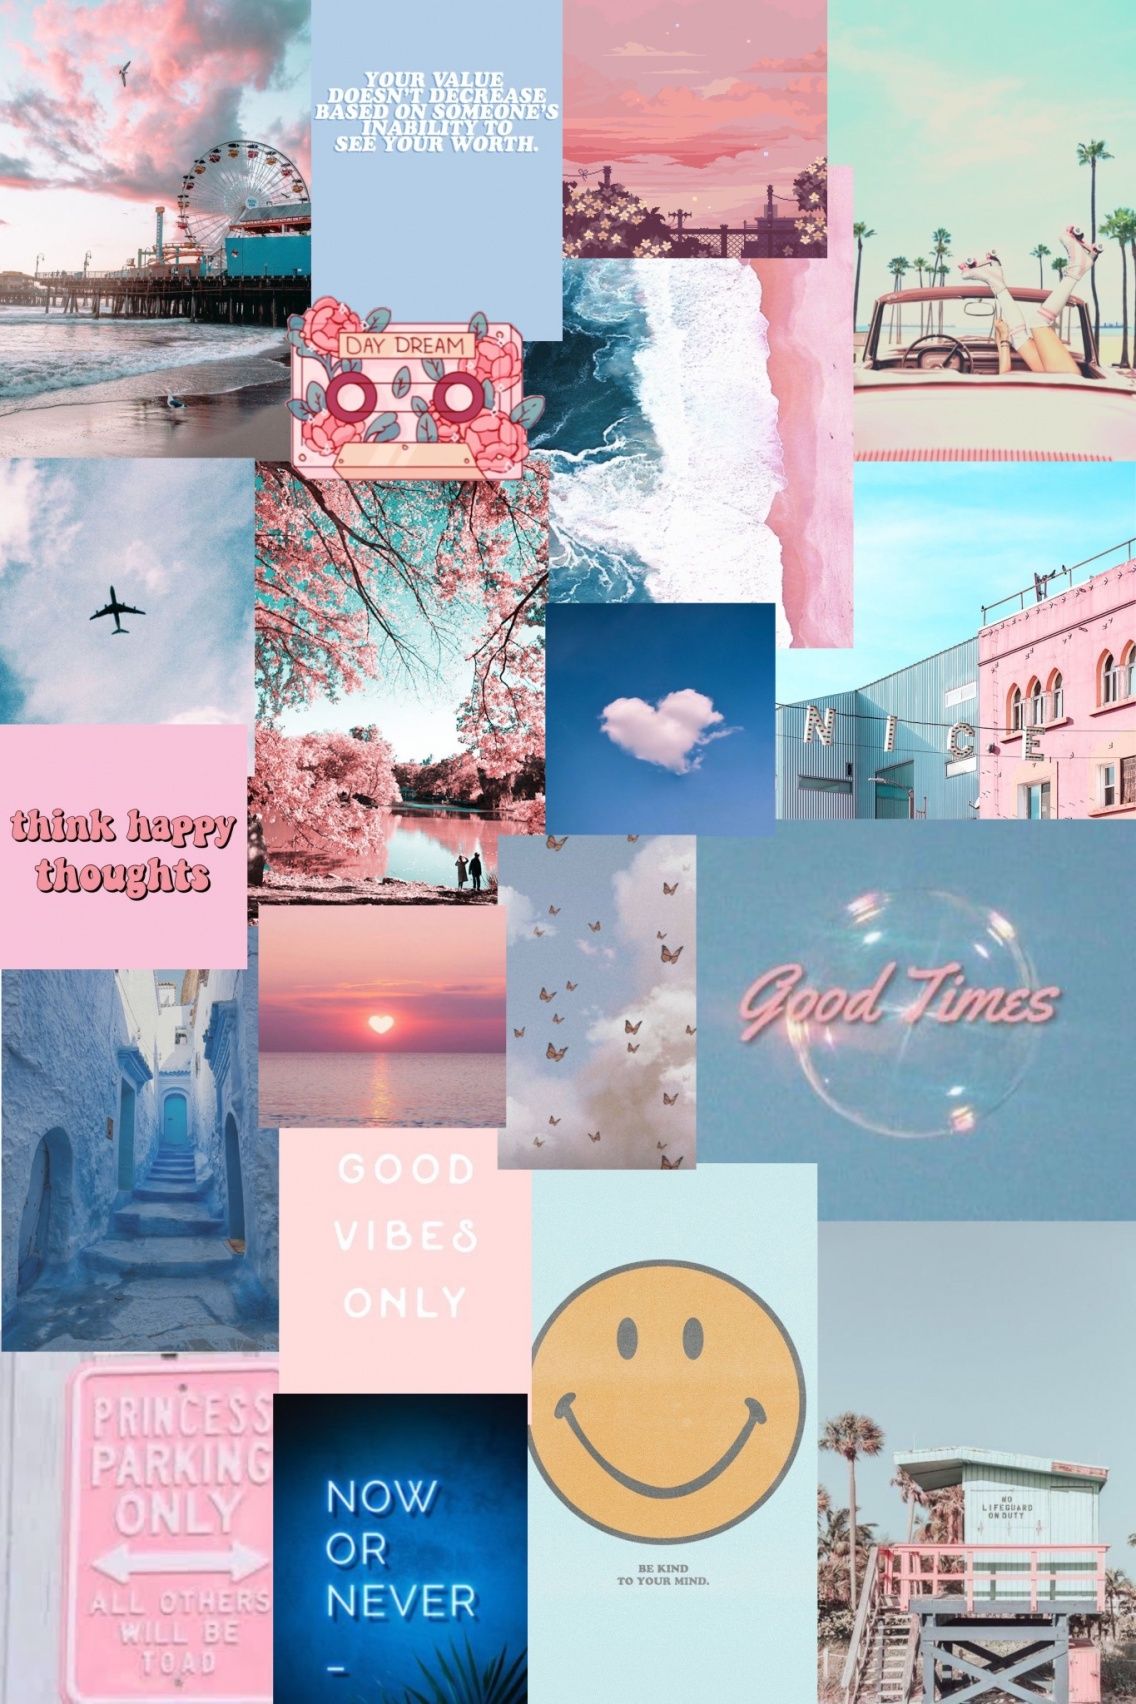 I hope you enjoy this wallpaper I made! #aesthetic #pinkandblue #pink #blue #collage #wallpaper